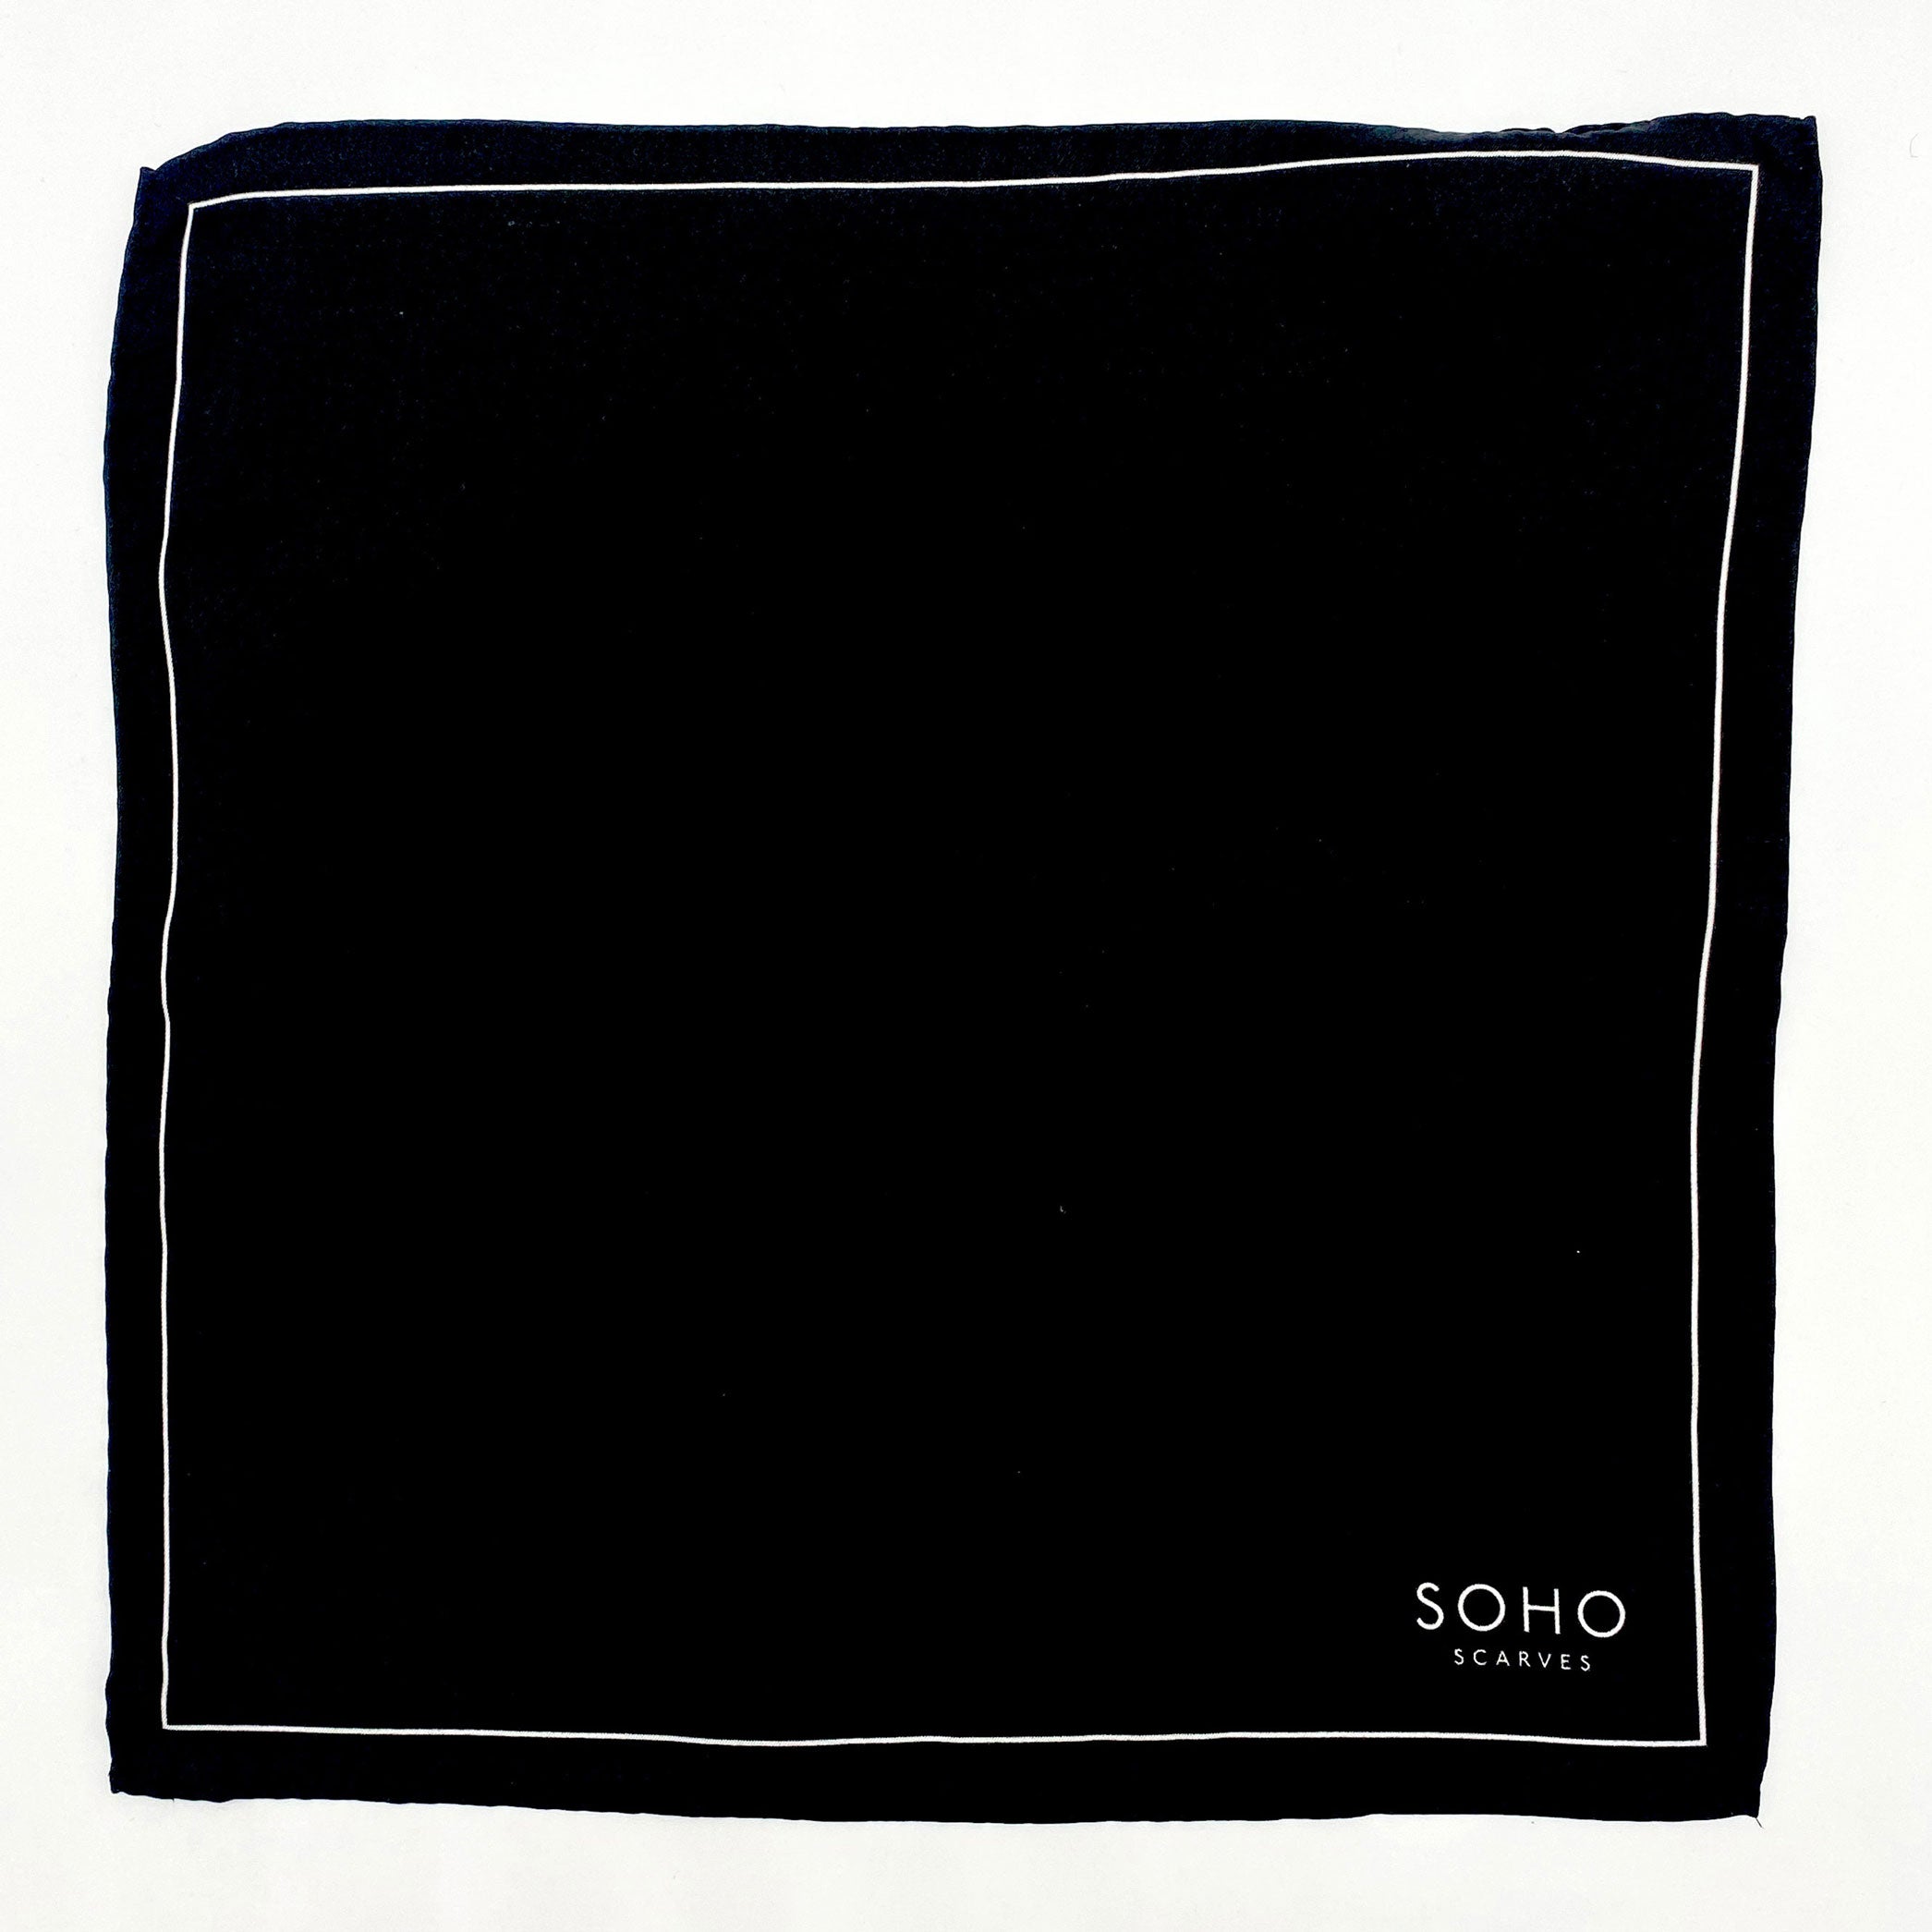 Completely unfolded black silk pocket square showing the entirity of the thin white border and the branding logo to the bottom-right.